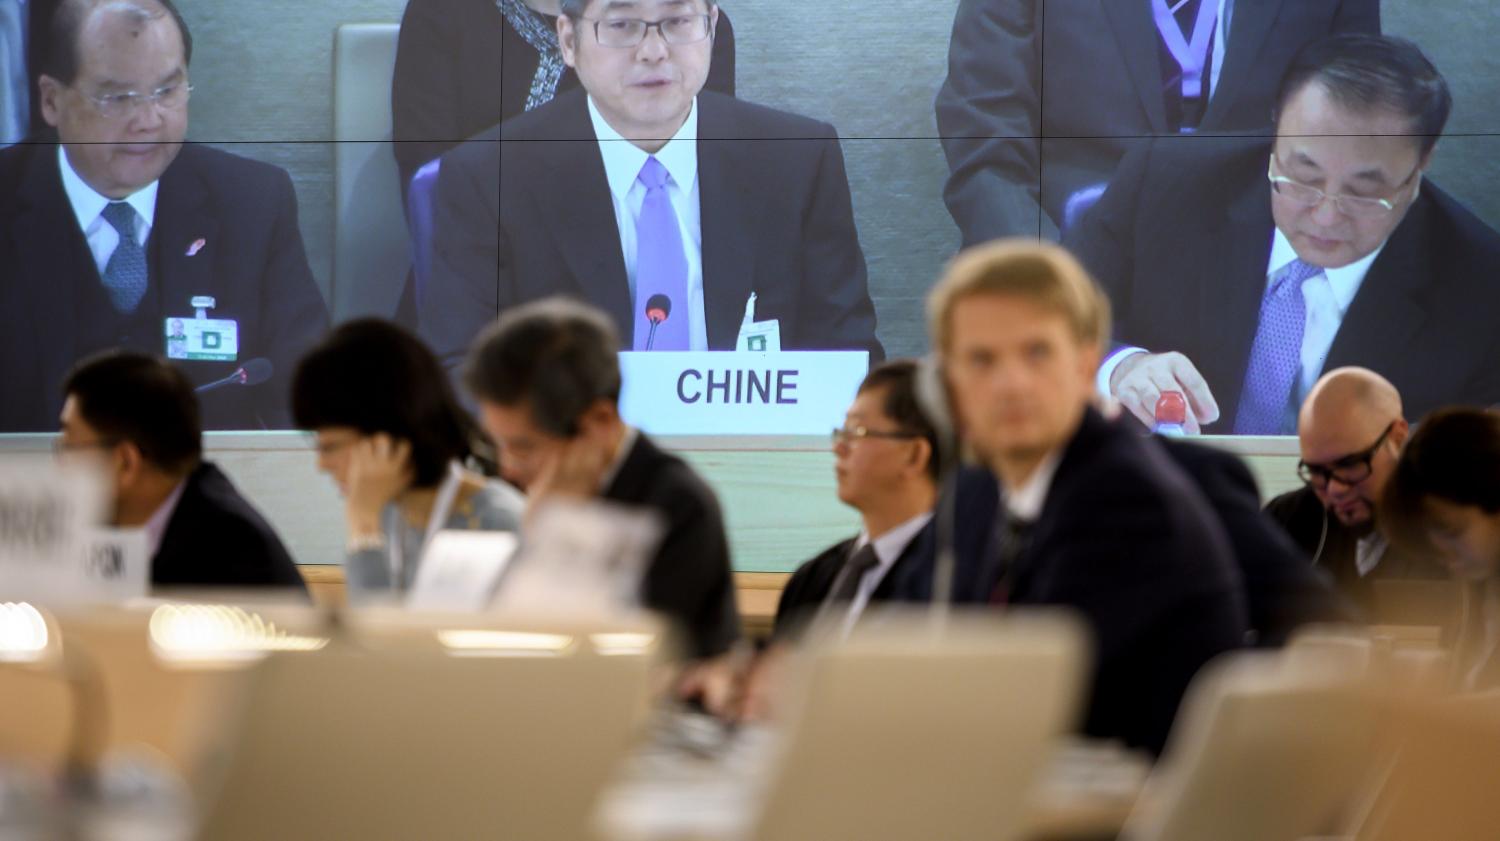 Chinese Vice Minister of Foreign Affairs Le Yucheng delivers a speech before the UN Human Rights Council prior to the Universal Periodic Review of China in Geneva (Getty/Fabrice Coffrini)